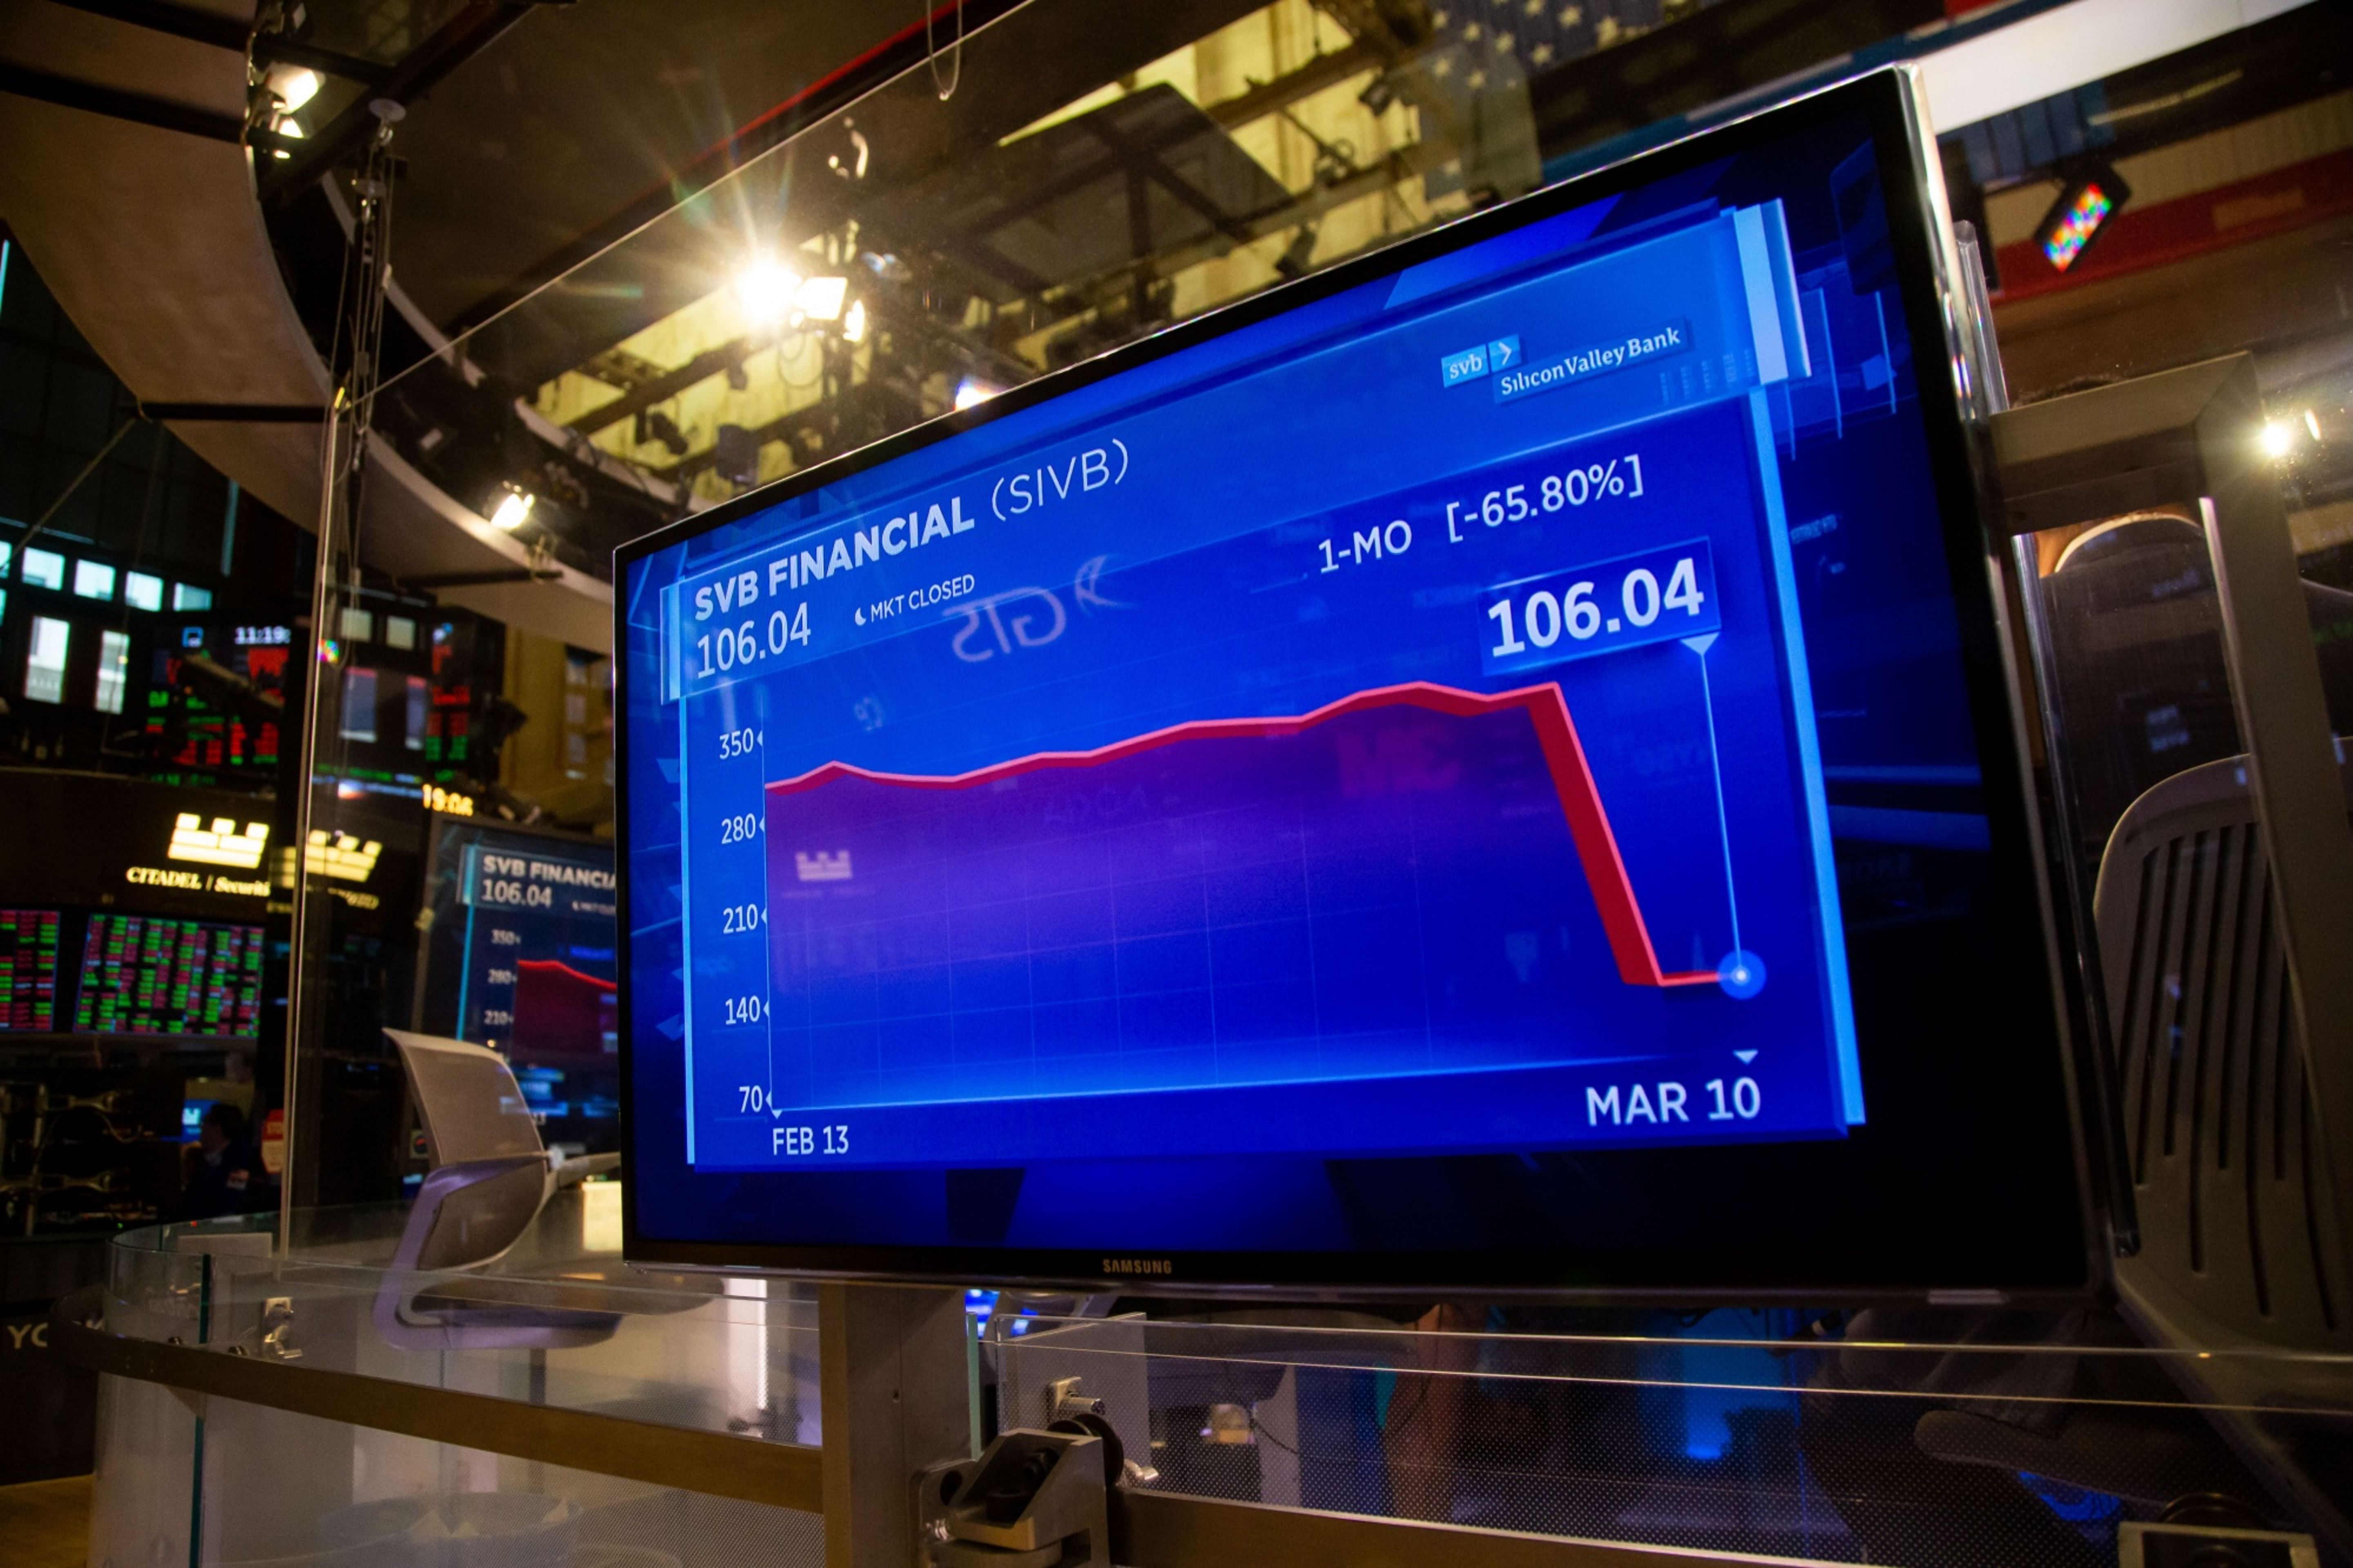 An SVB Financial Group chart at the New York Stock Exchange on March 10. Credit: Bloomberg Photo